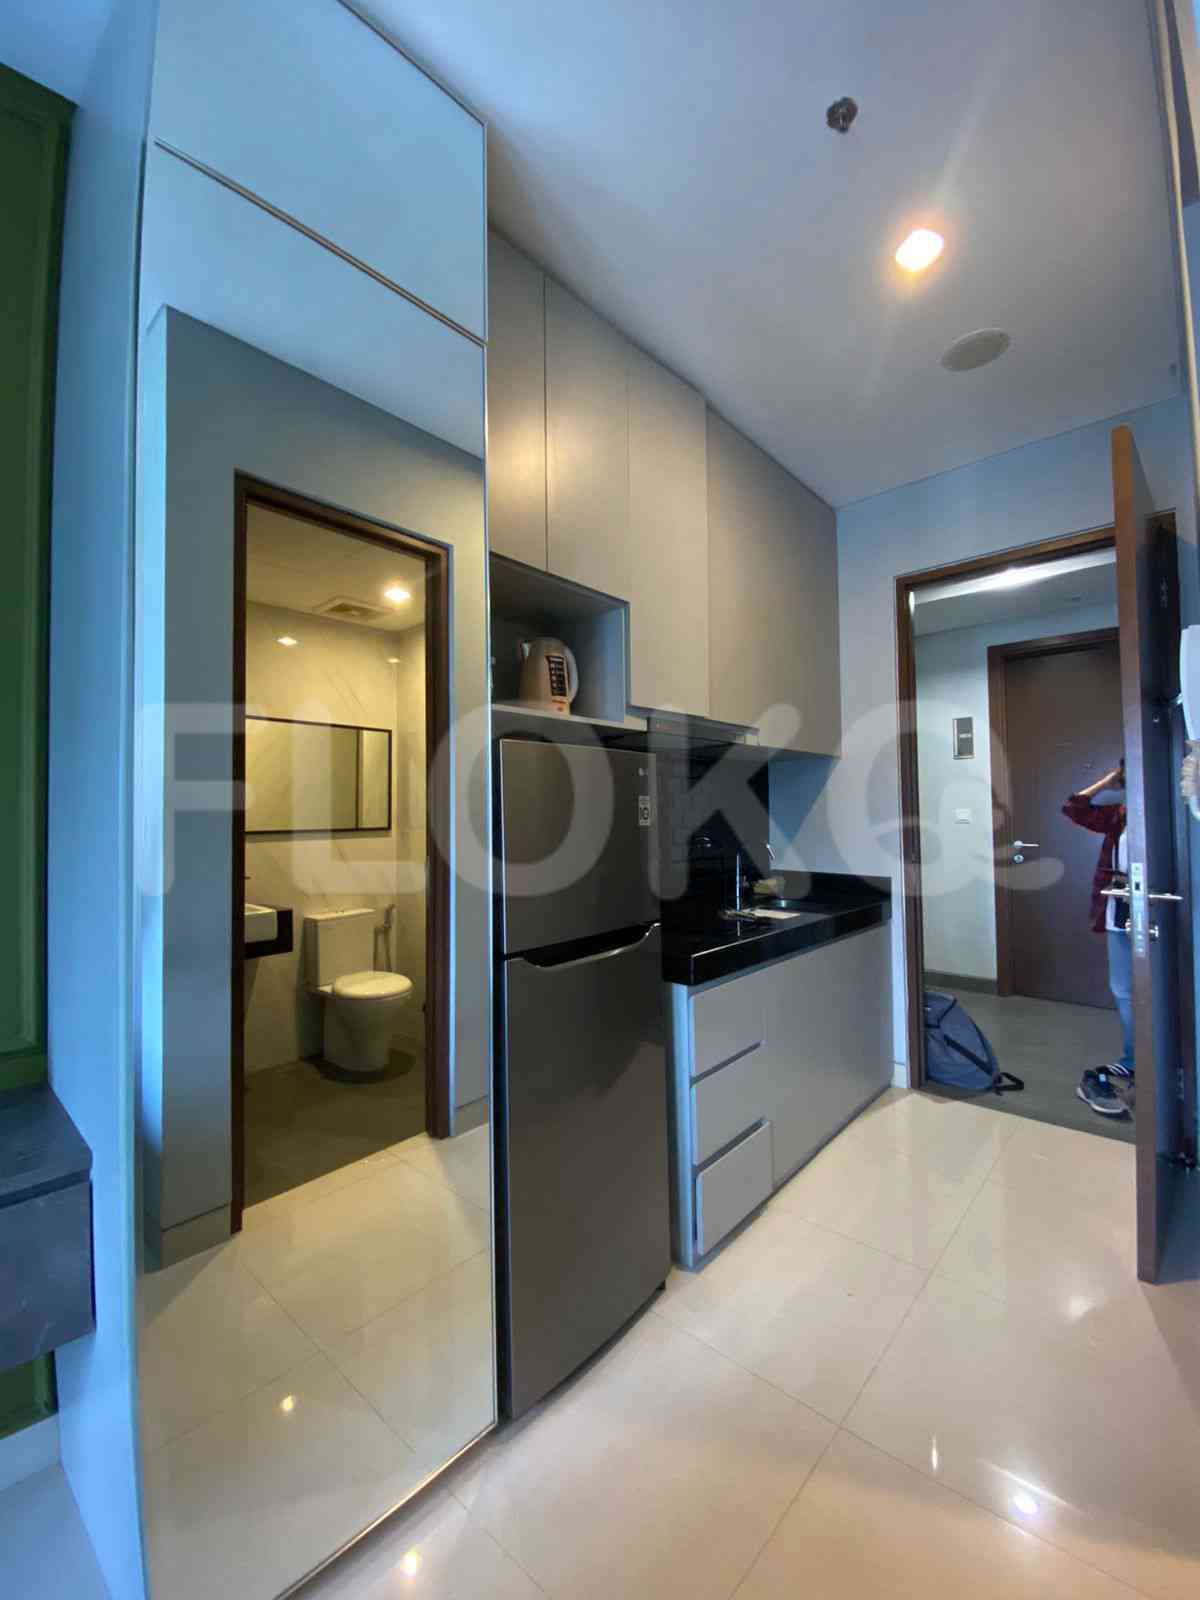 1 Bedroom on 38th Floor for Rent in Ciputra World 2 Apartment - fku487 1